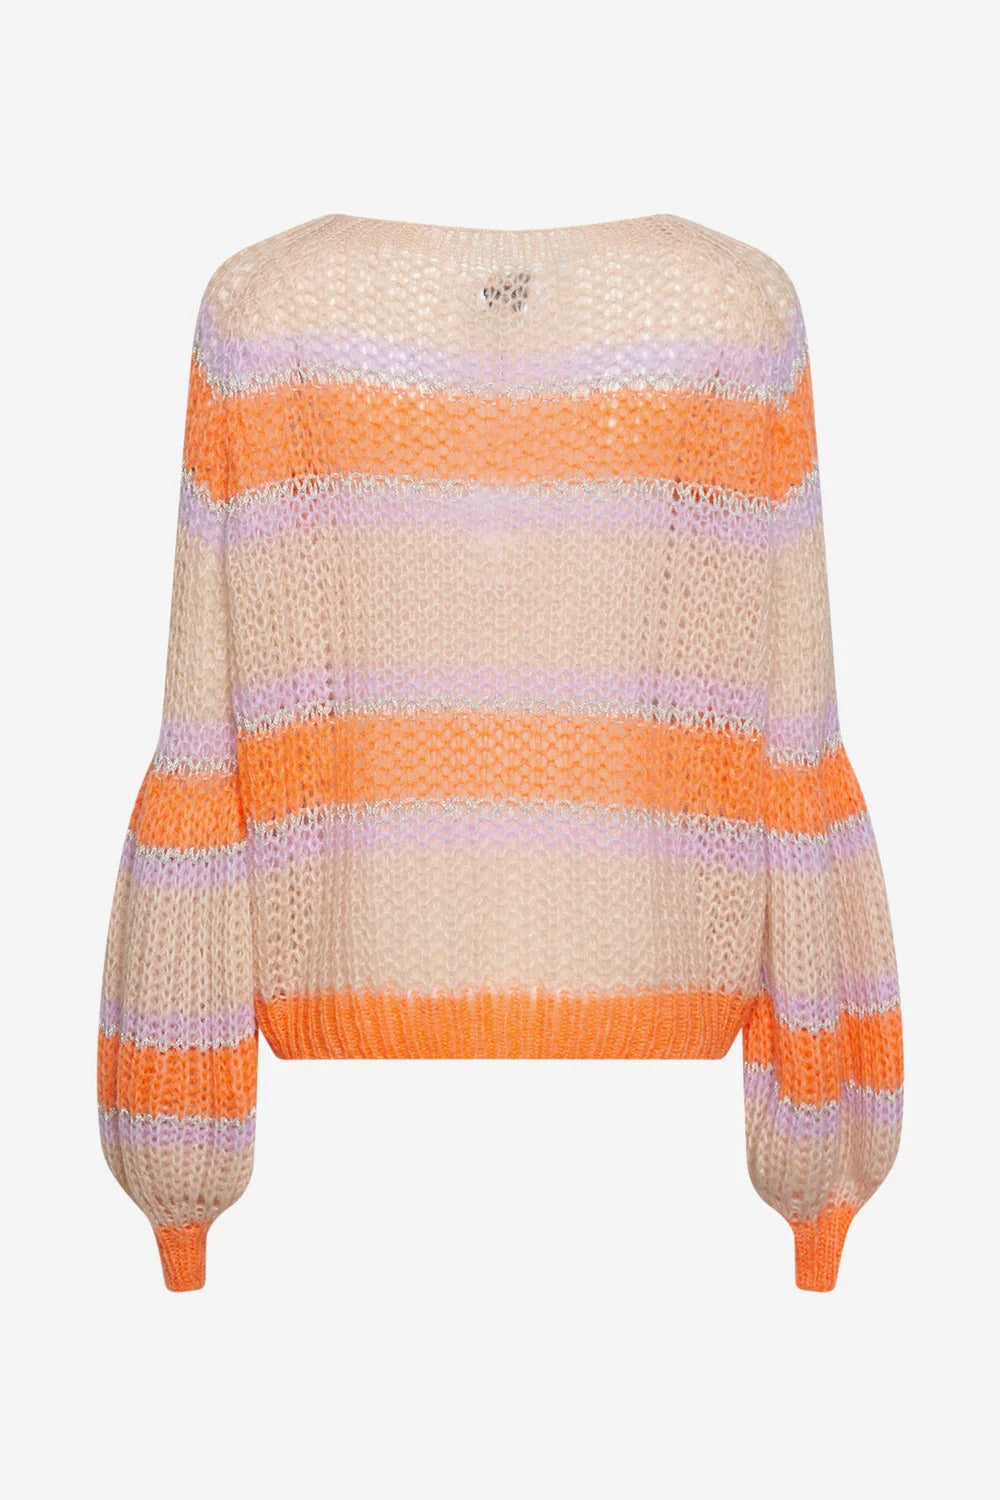 Pacific Knit Sweater Apricot/Lavender Mix